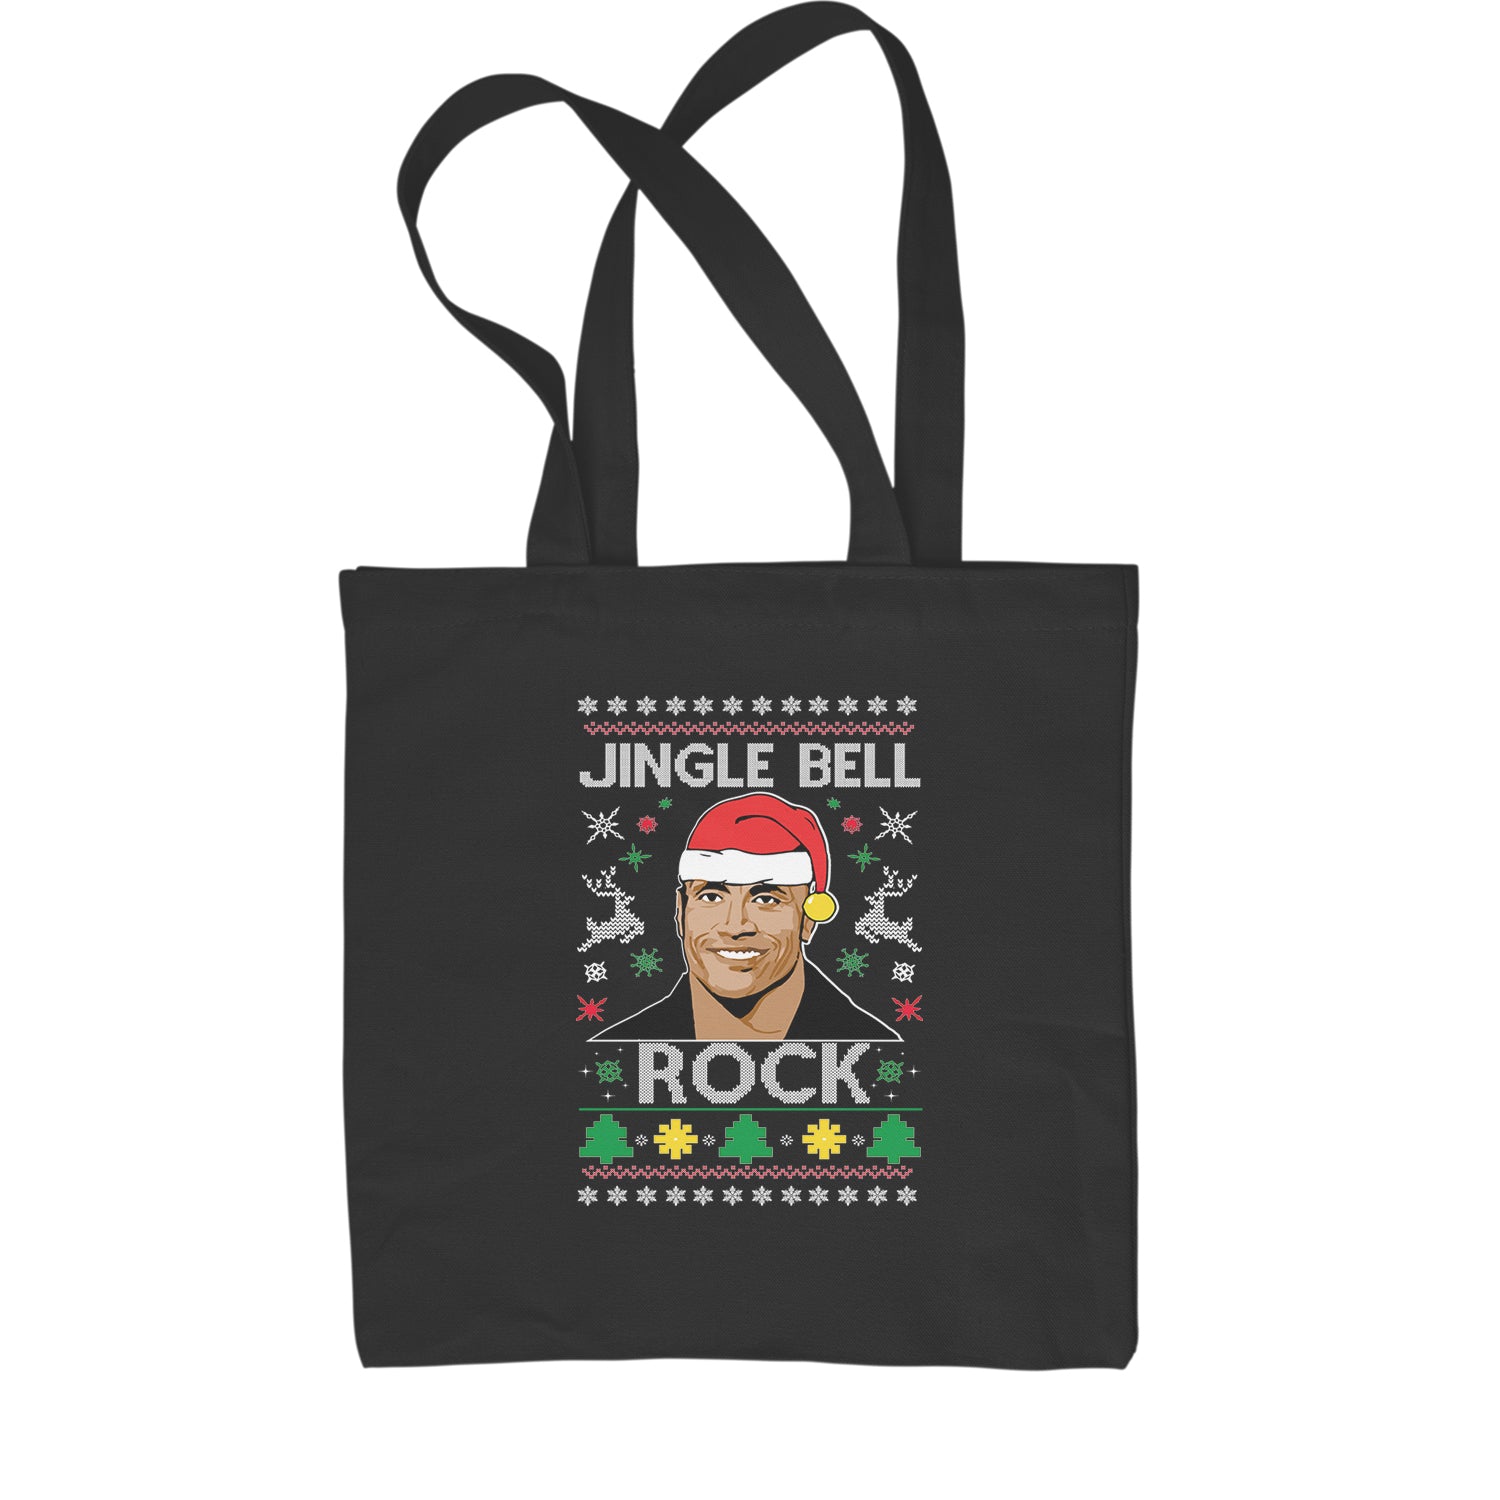 Jingle Bell Rock Ugly Christmas Shopping Tote Bag 2018, champ, Christmas, dwayne, johnson, peoples, rock, Sweatshirts, the, Ugly by Expression Tees